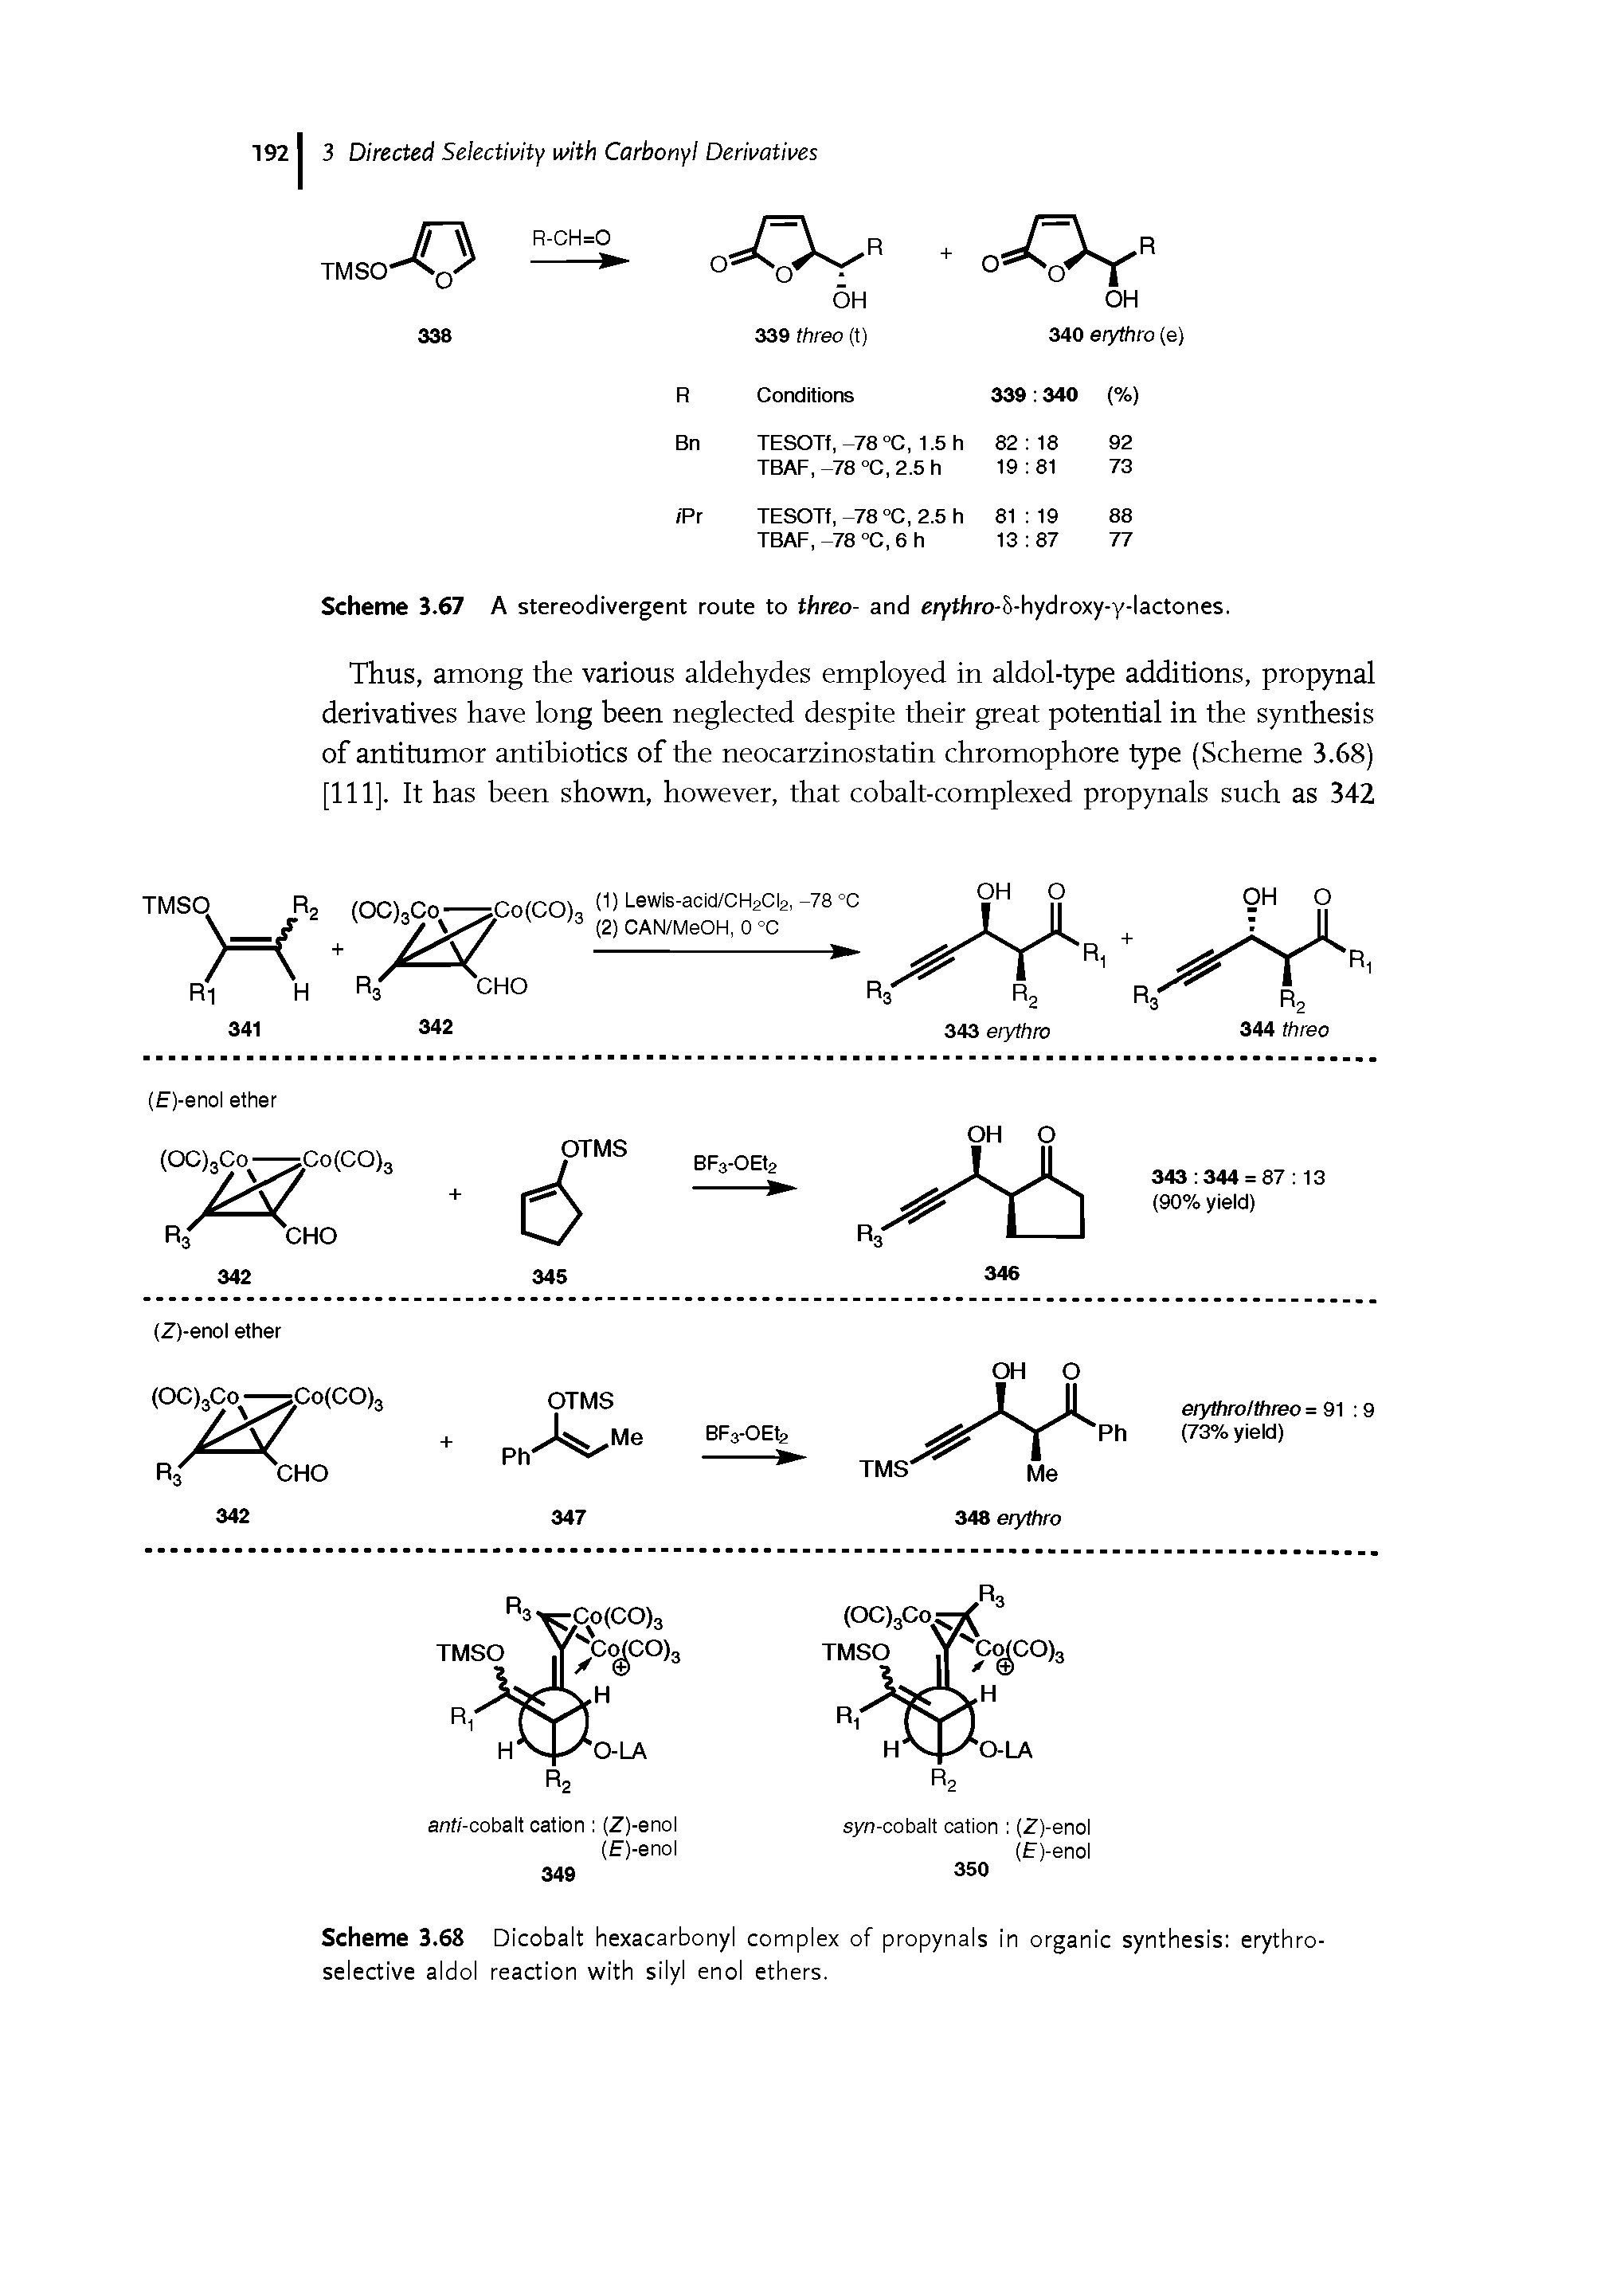 Scheme 3.68 Dicobalt hexacarbonyl complex of propynals in organic synthesis erythro-selective aldol reaction with silyl enol ethers.